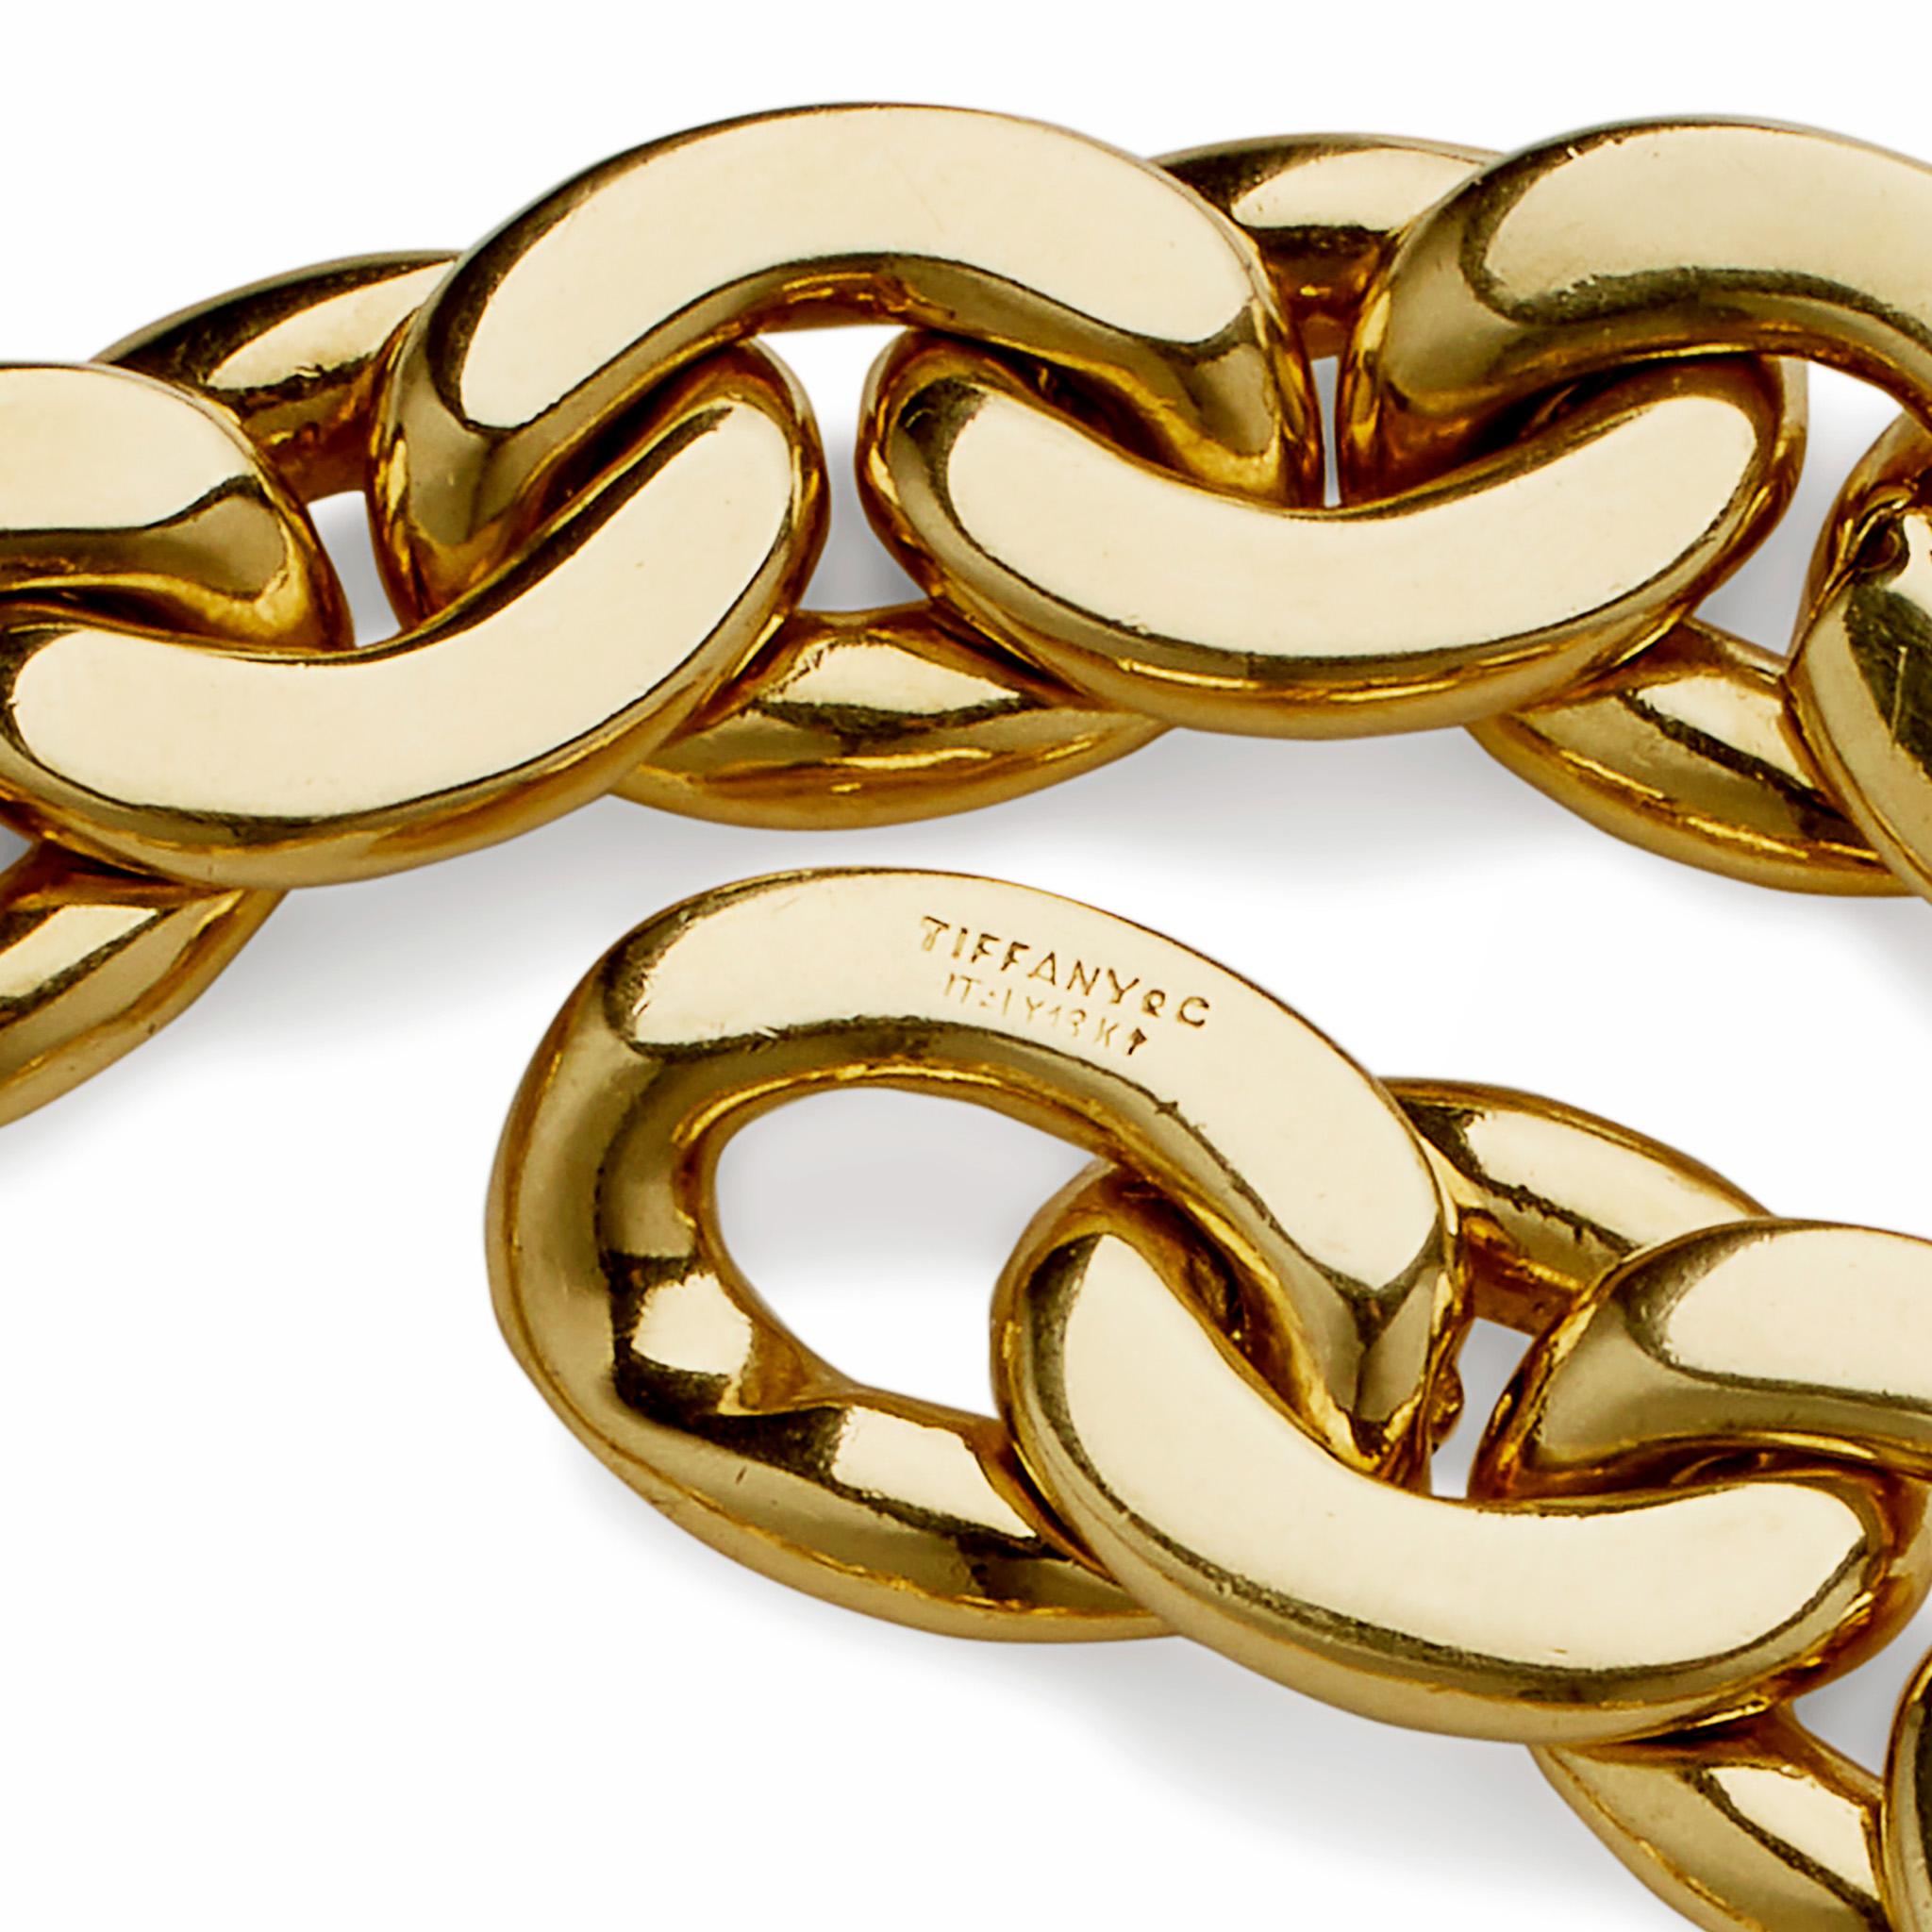 Tiffany & Co. 18k Gold Curb Link Bracelet In Excellent Condition For Sale In New York, NY